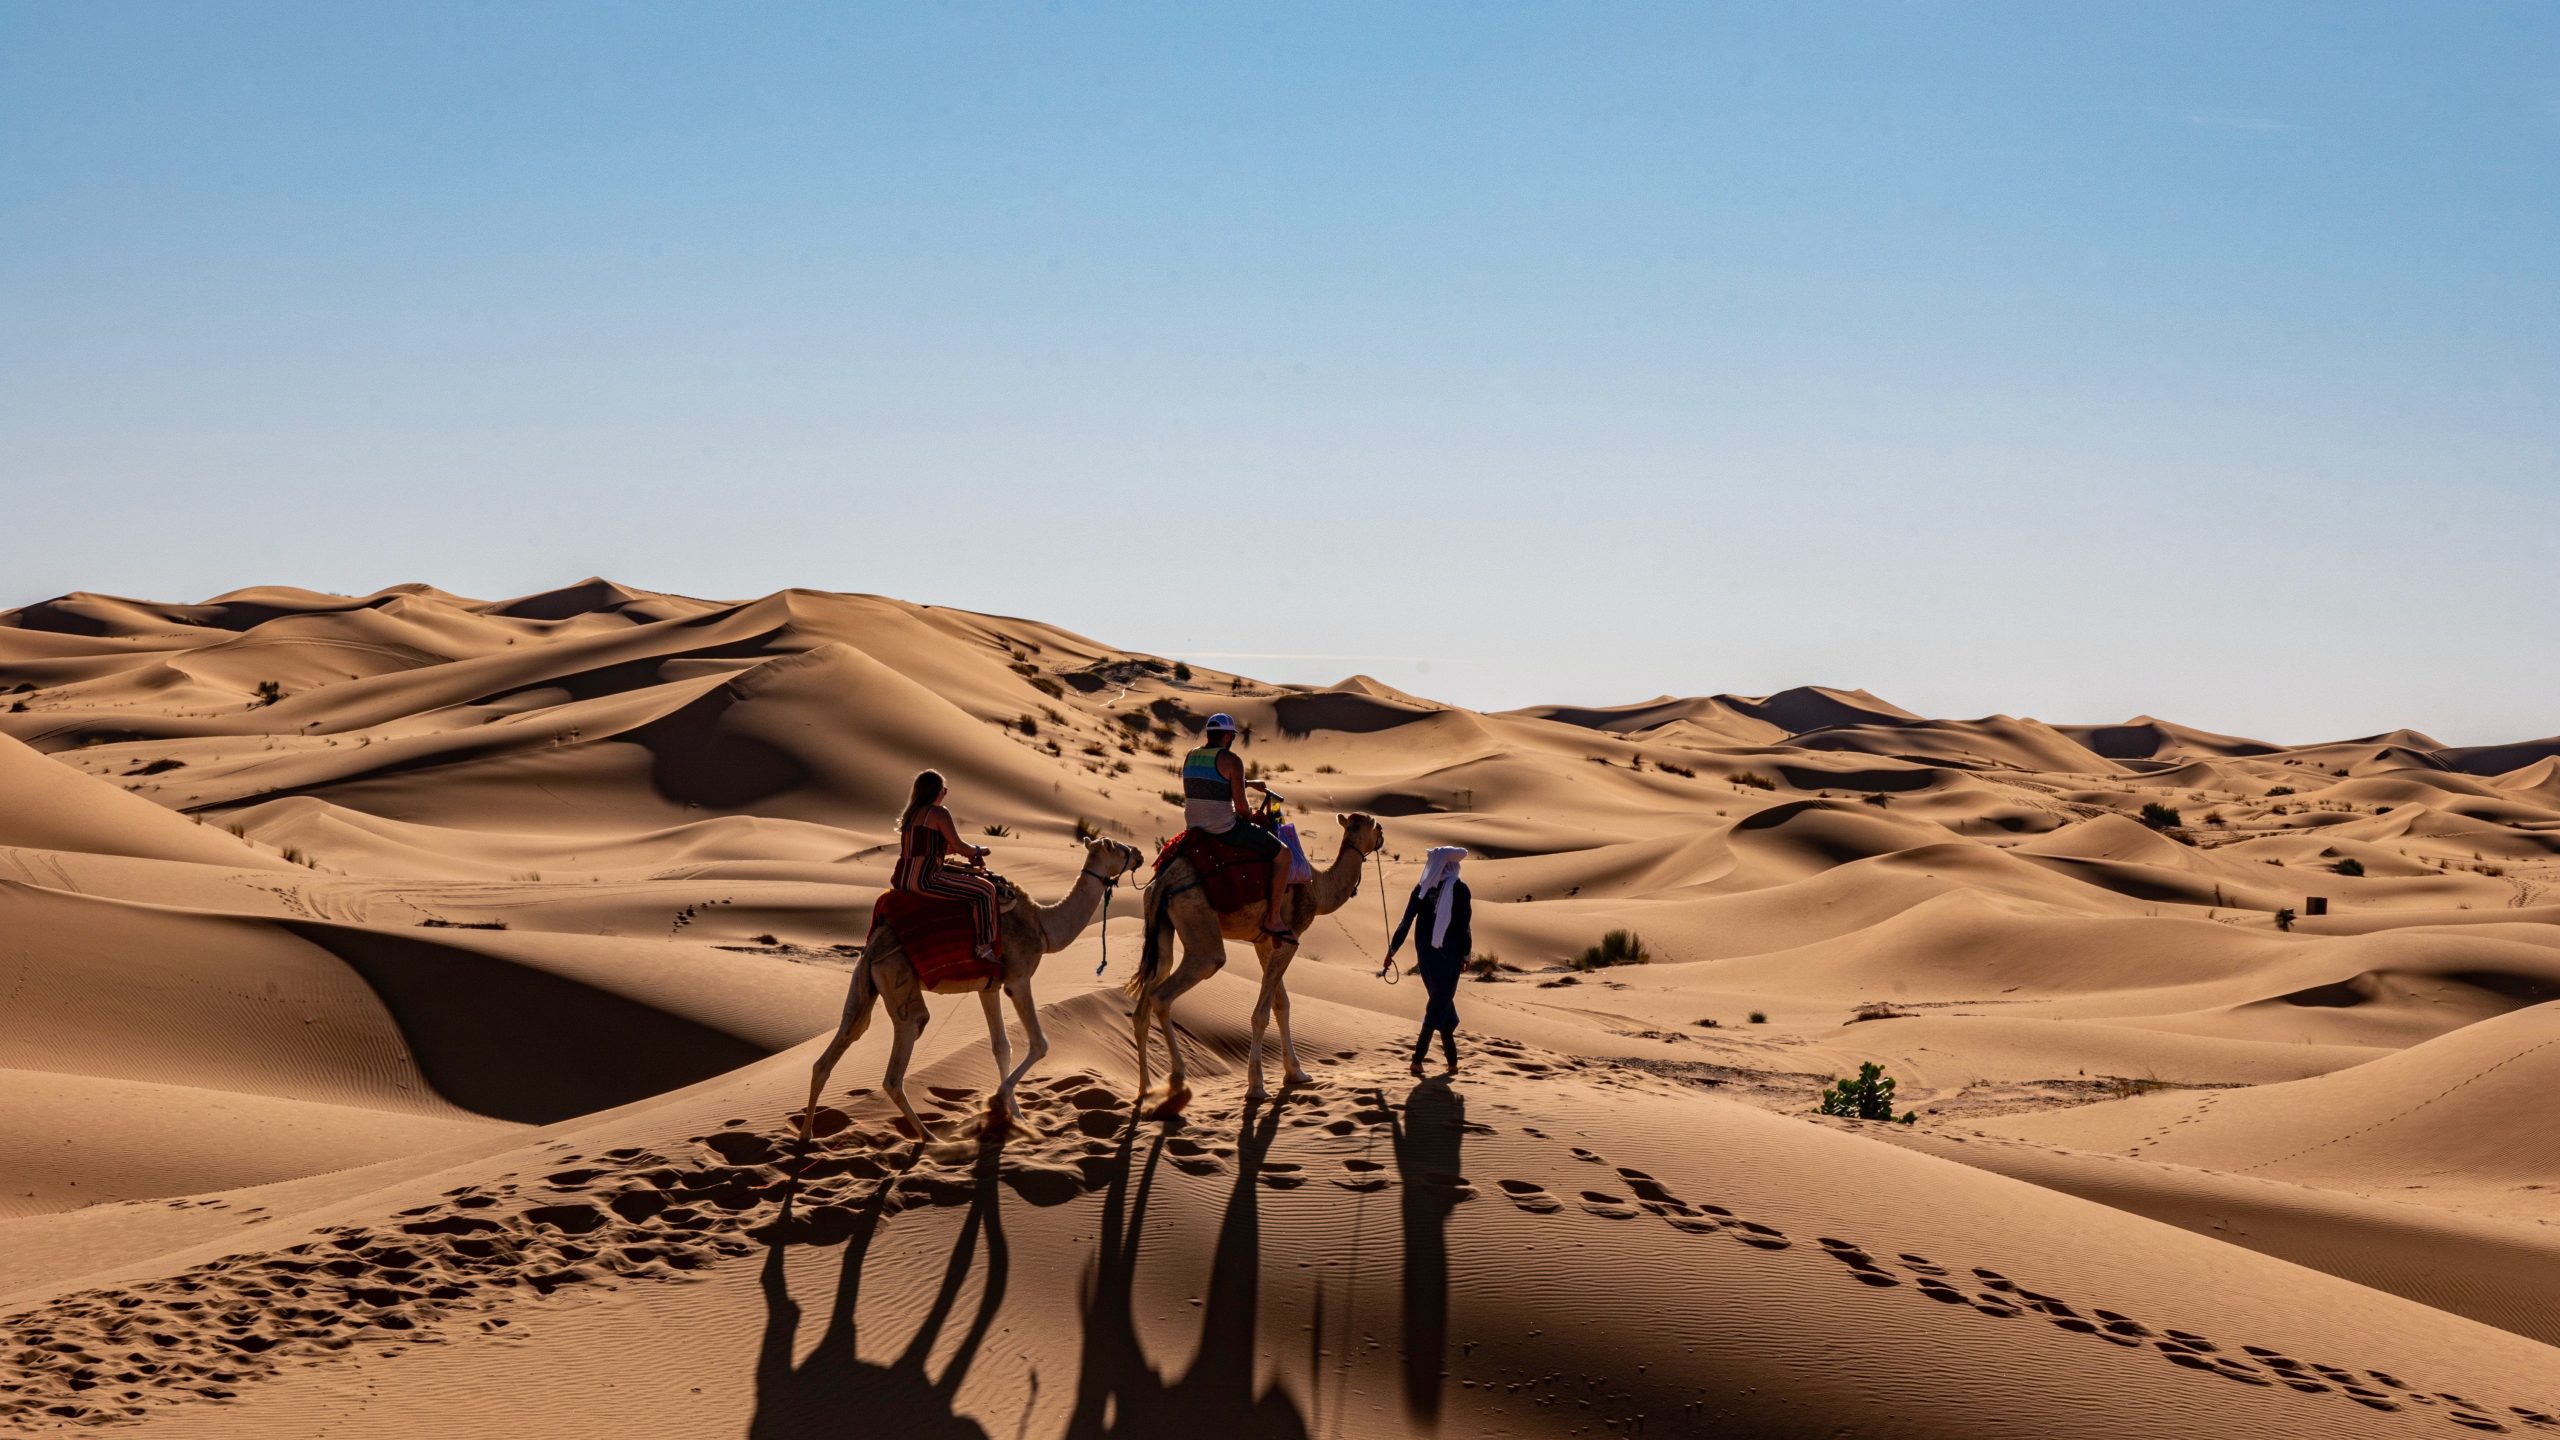 How safe is it to travel in Morocco right now